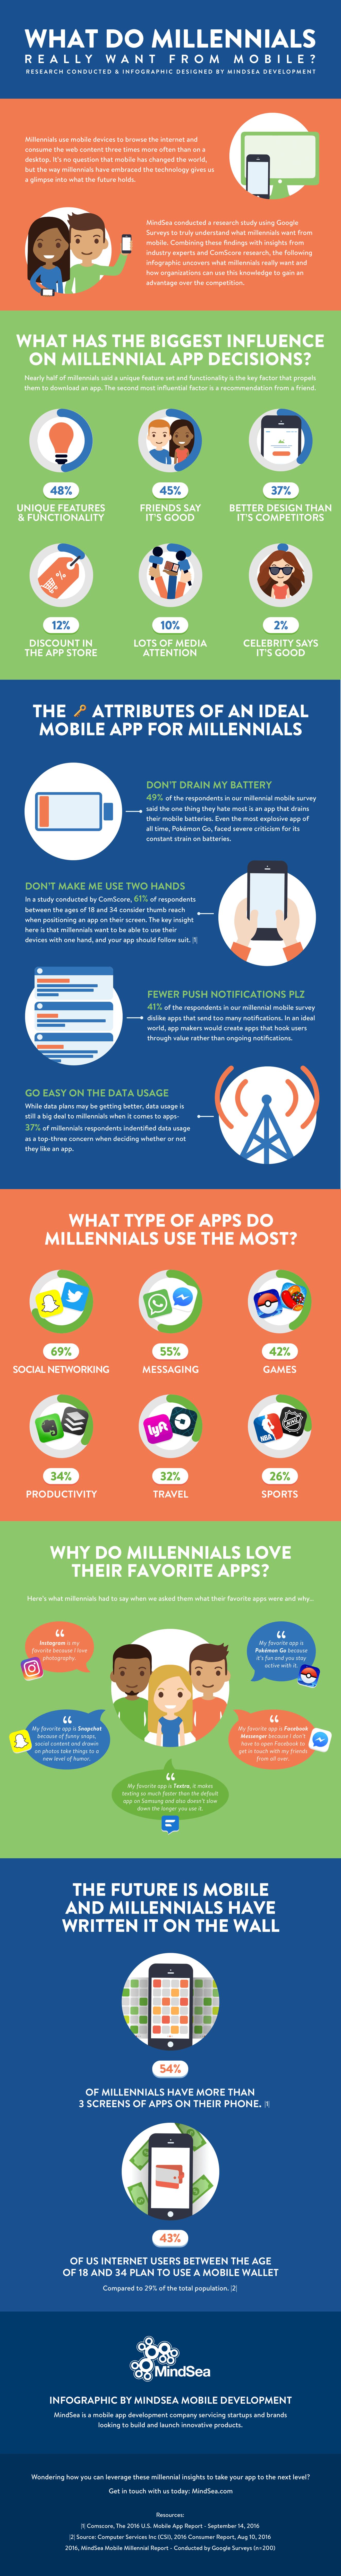 What Do Millennials Really Want From Mobile Apps? - #Infographic